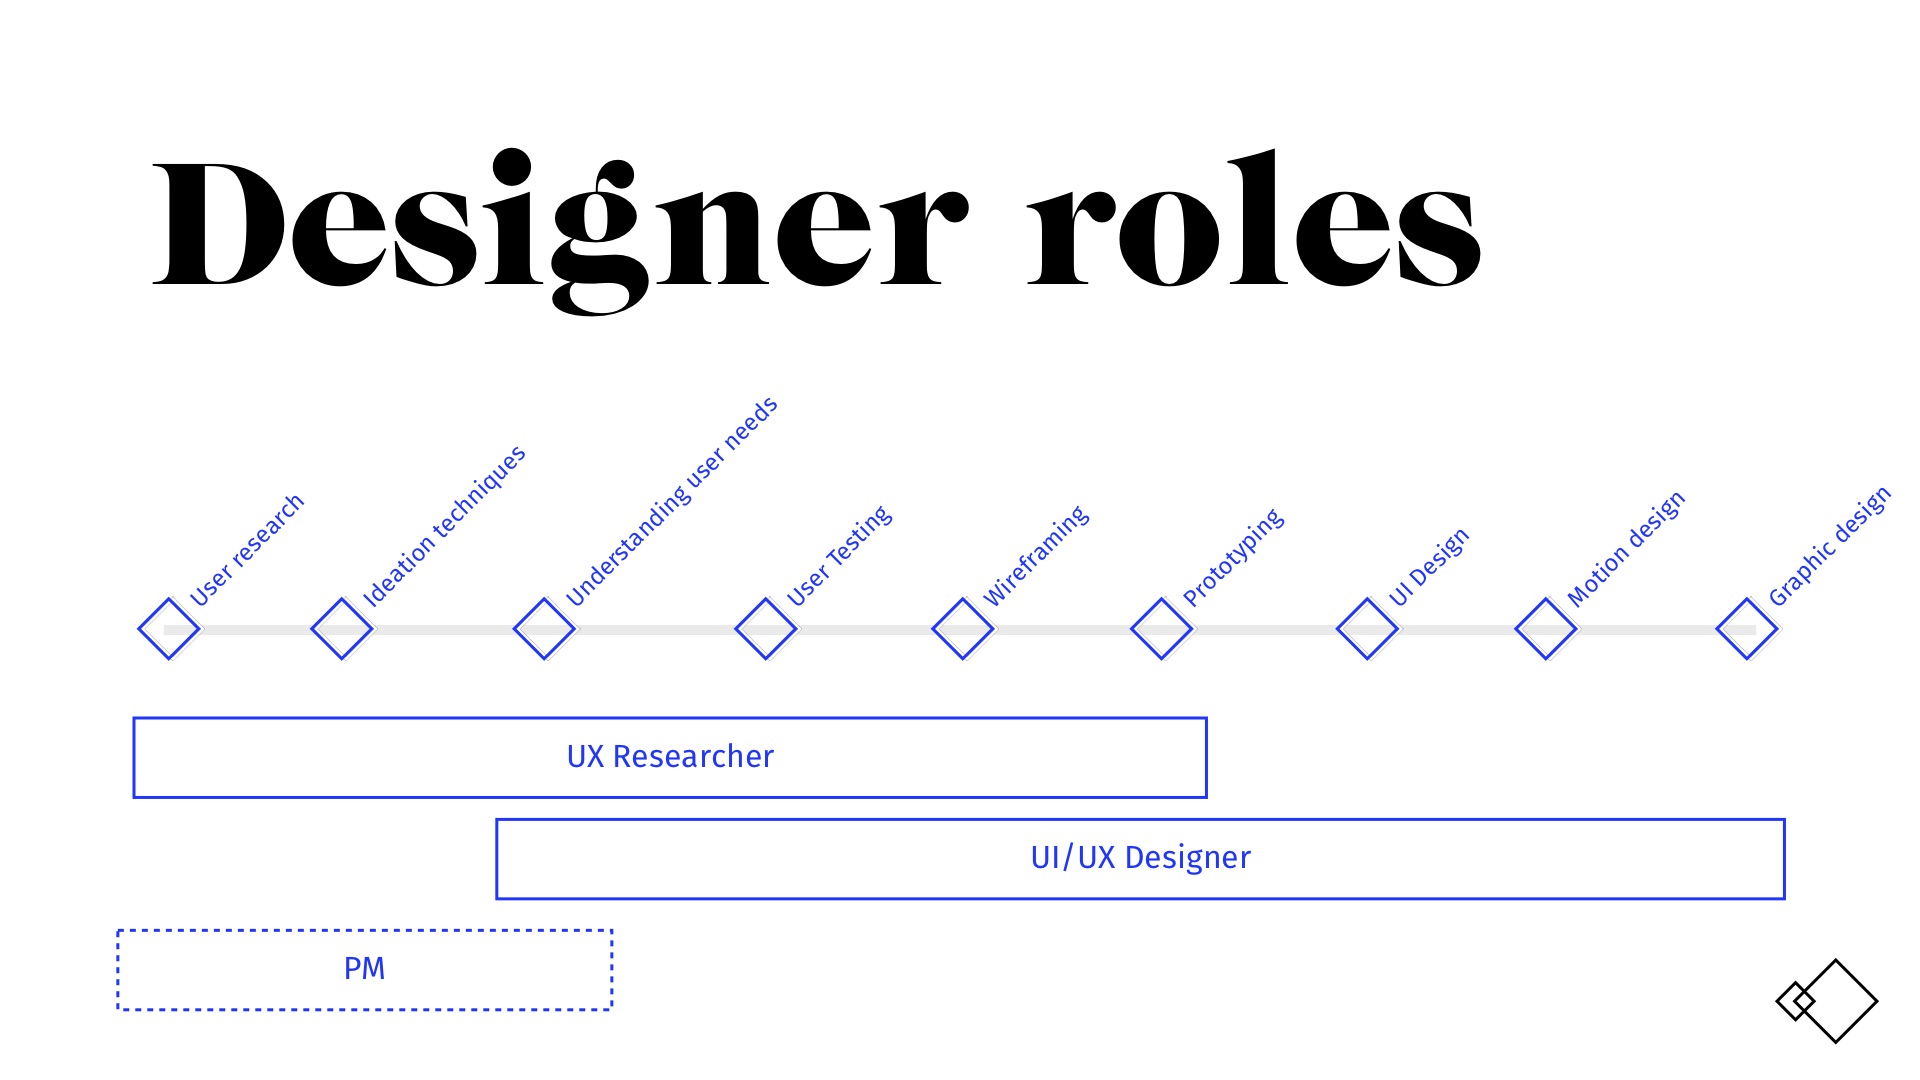 A presentation slide showing the varying skills of user researchers and designers